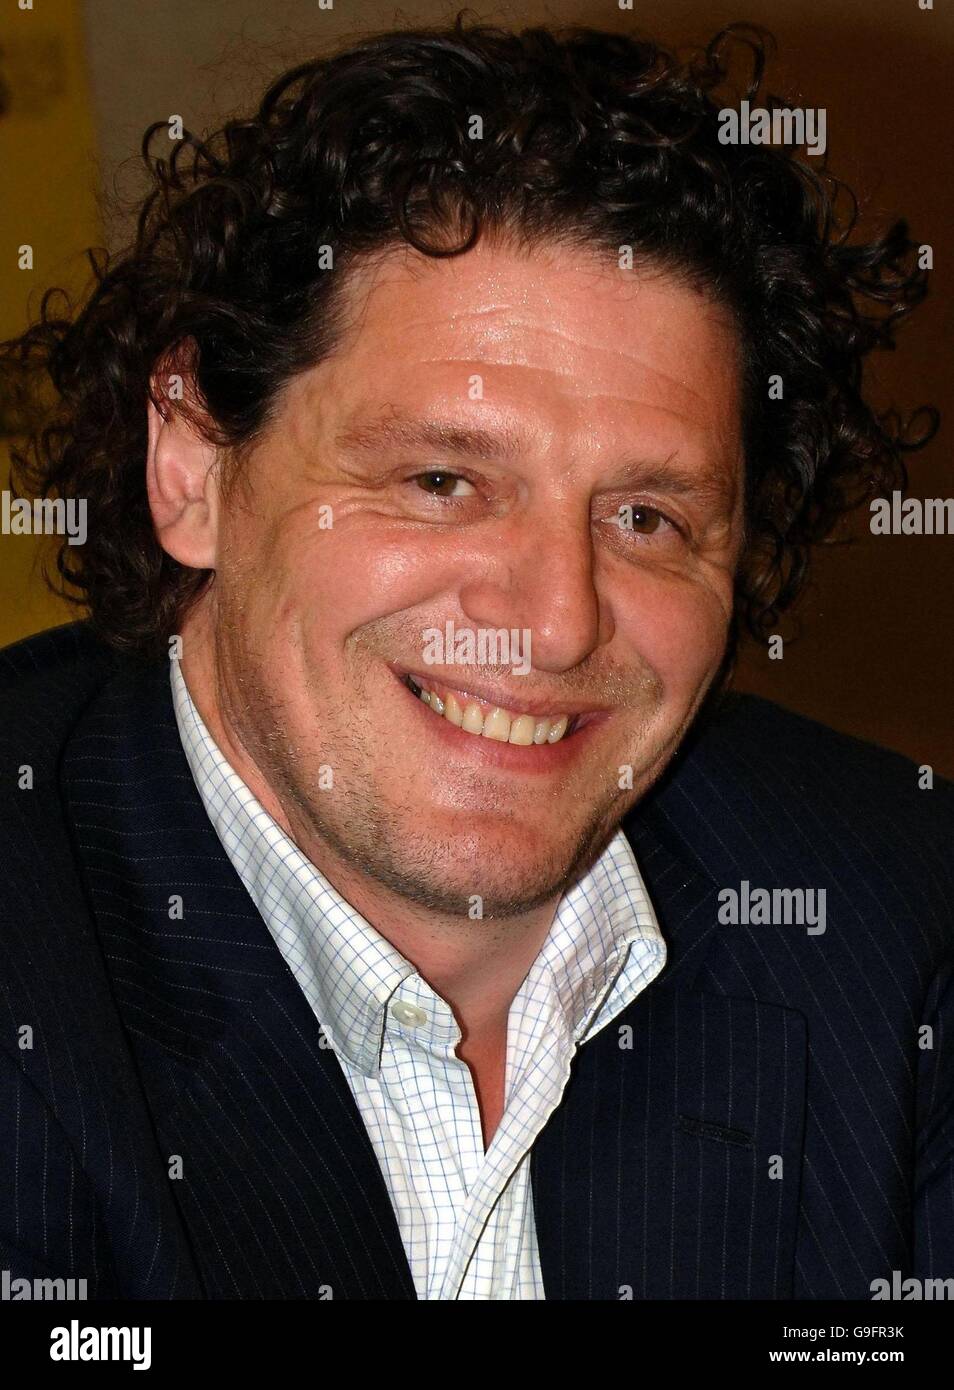 Chef Marco Pierre White during a signing of his autobiography 'White Slave' at Selfridges, London. PRESS ASSOCIATION Photo. Picture date: Wednesday August 23 2006. See PA story. Photo credit should read Fiona Hanson/PA Stock Photo